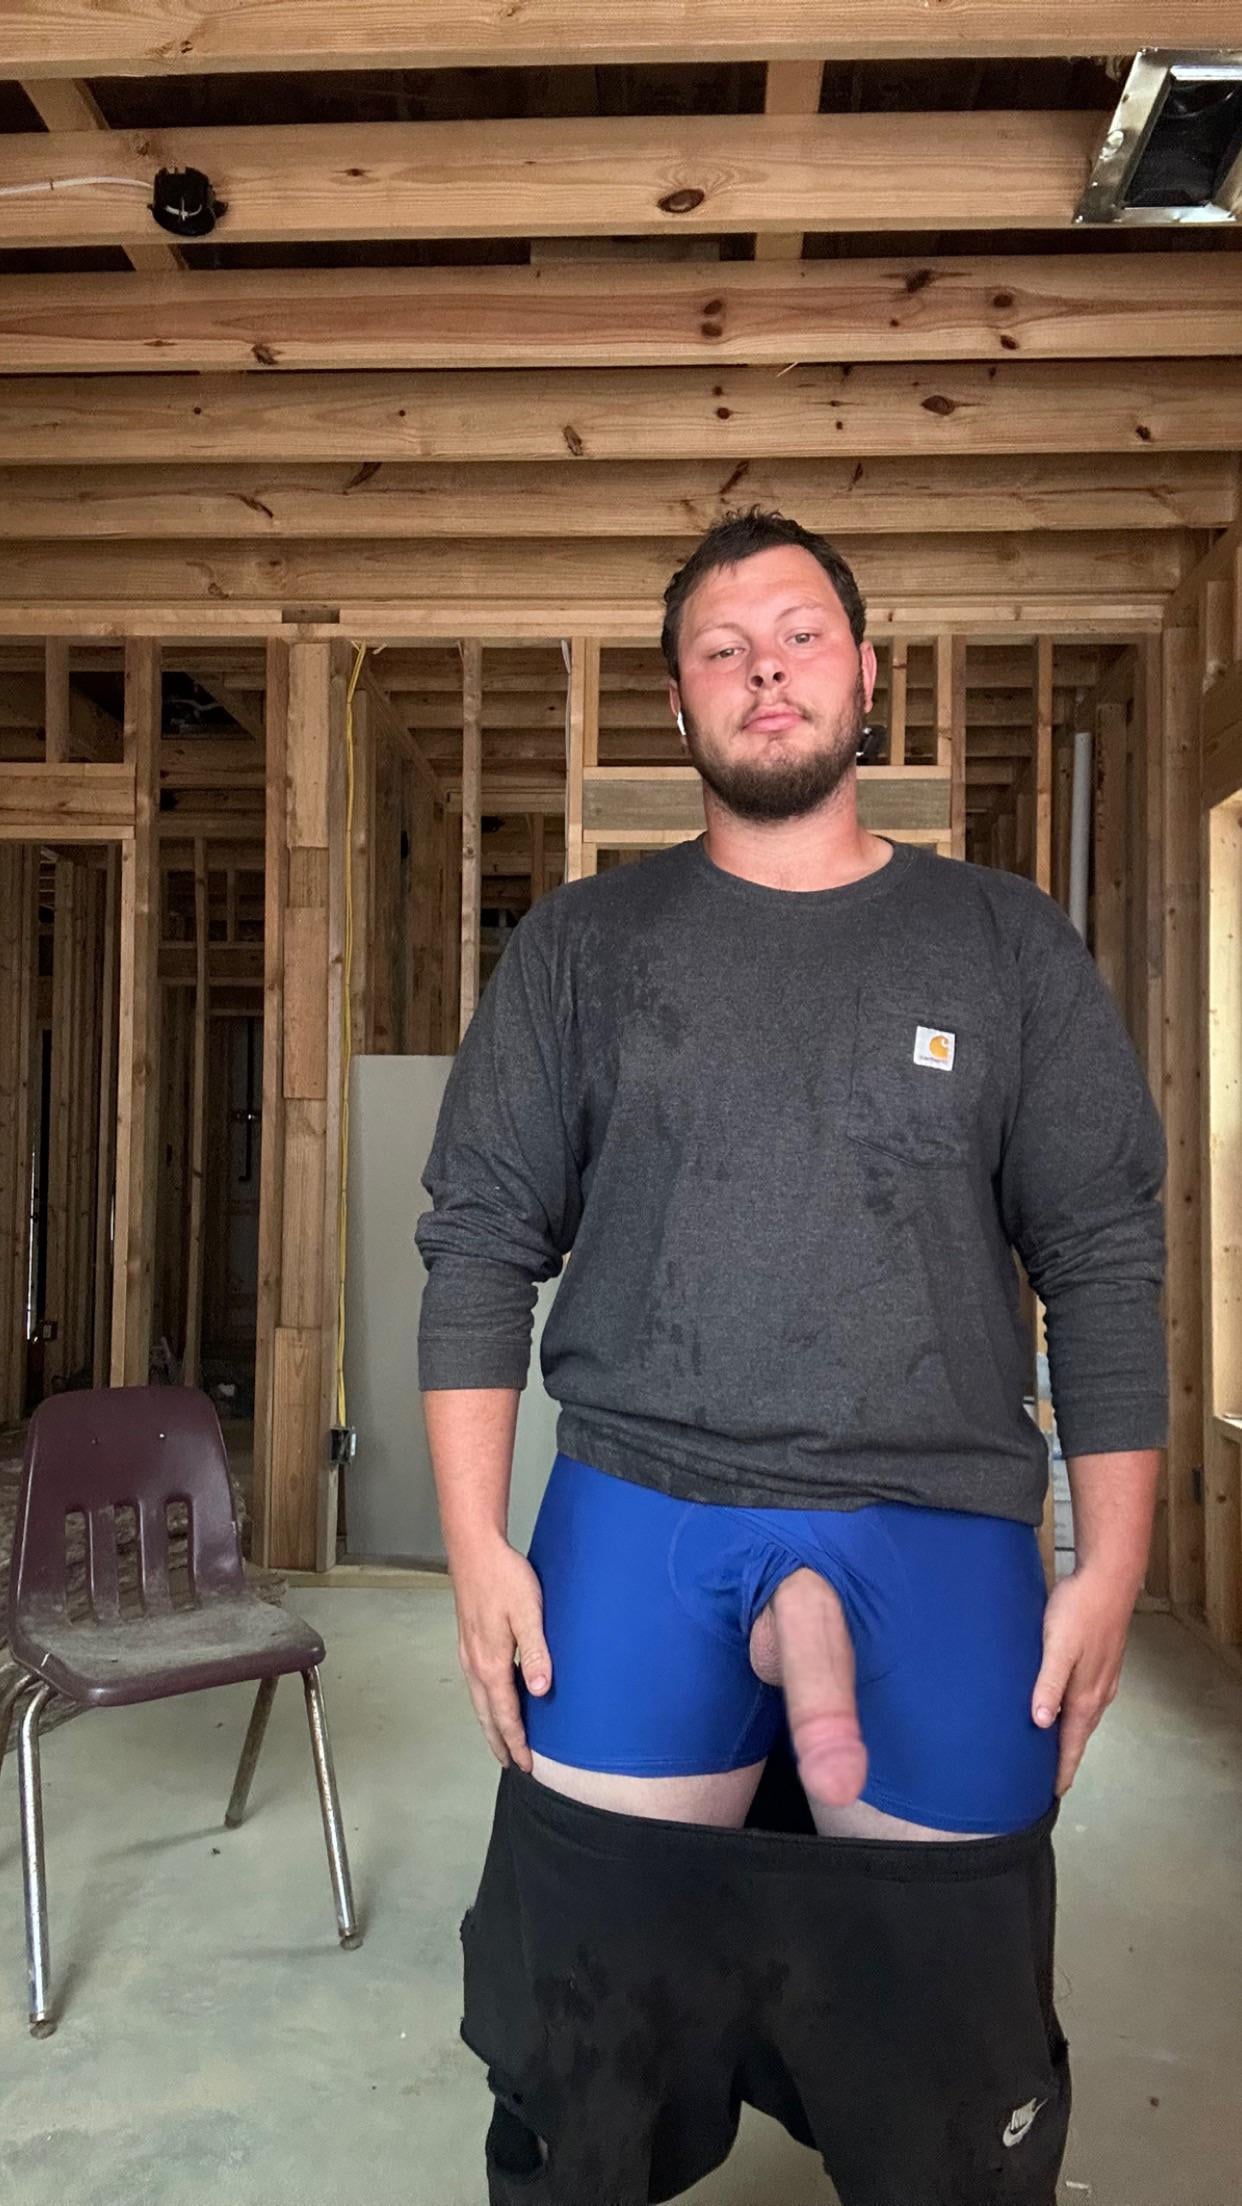 Average construction workers soft cock